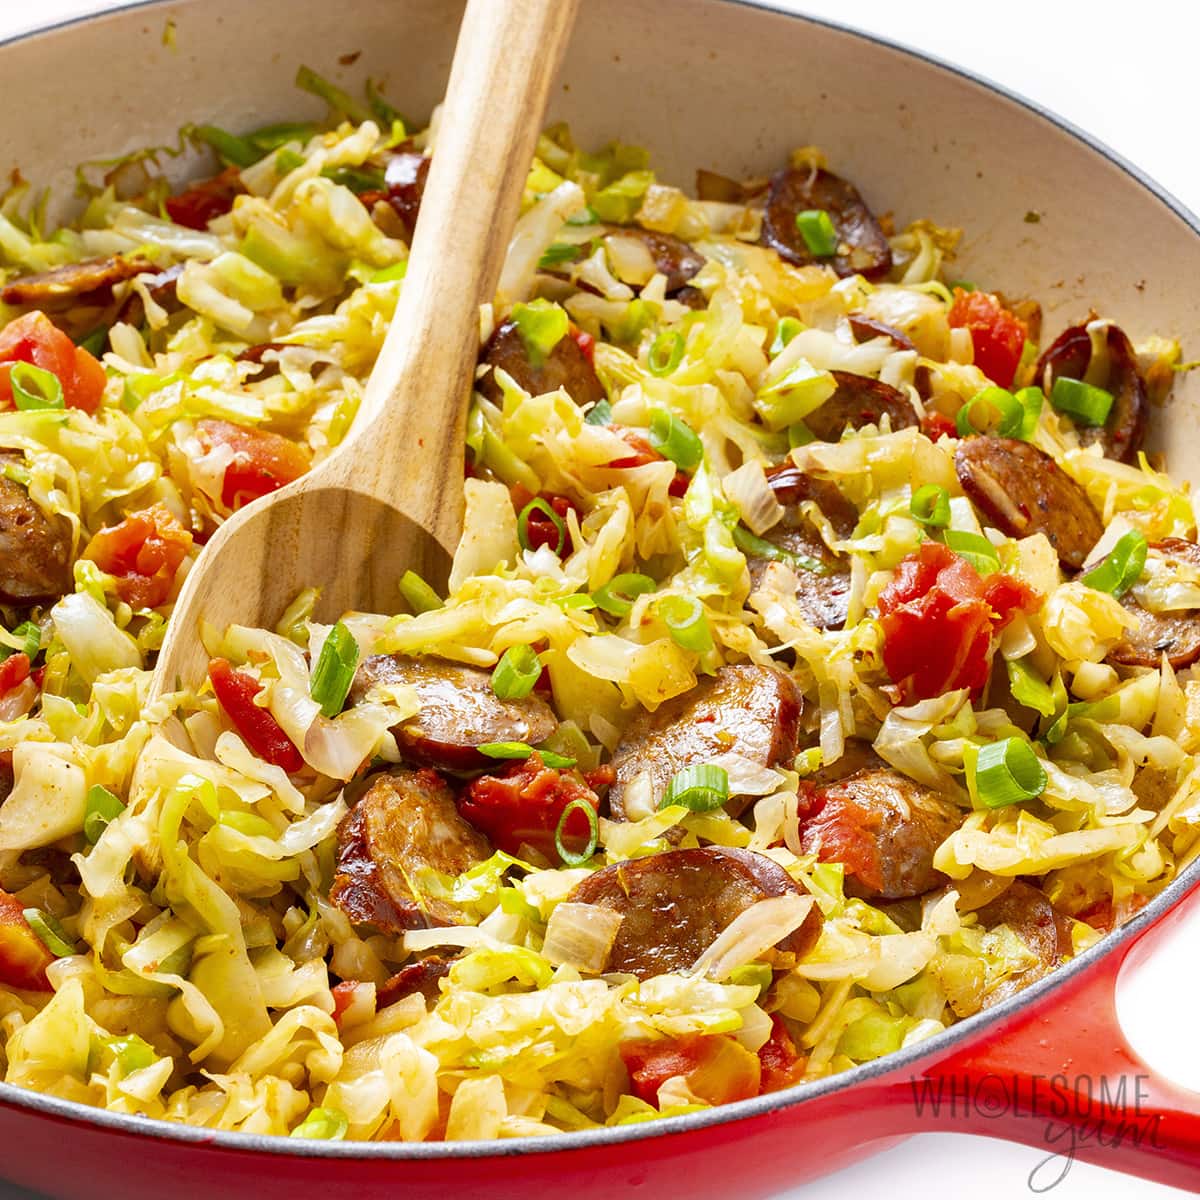 Cabbage and sausage in a pan.